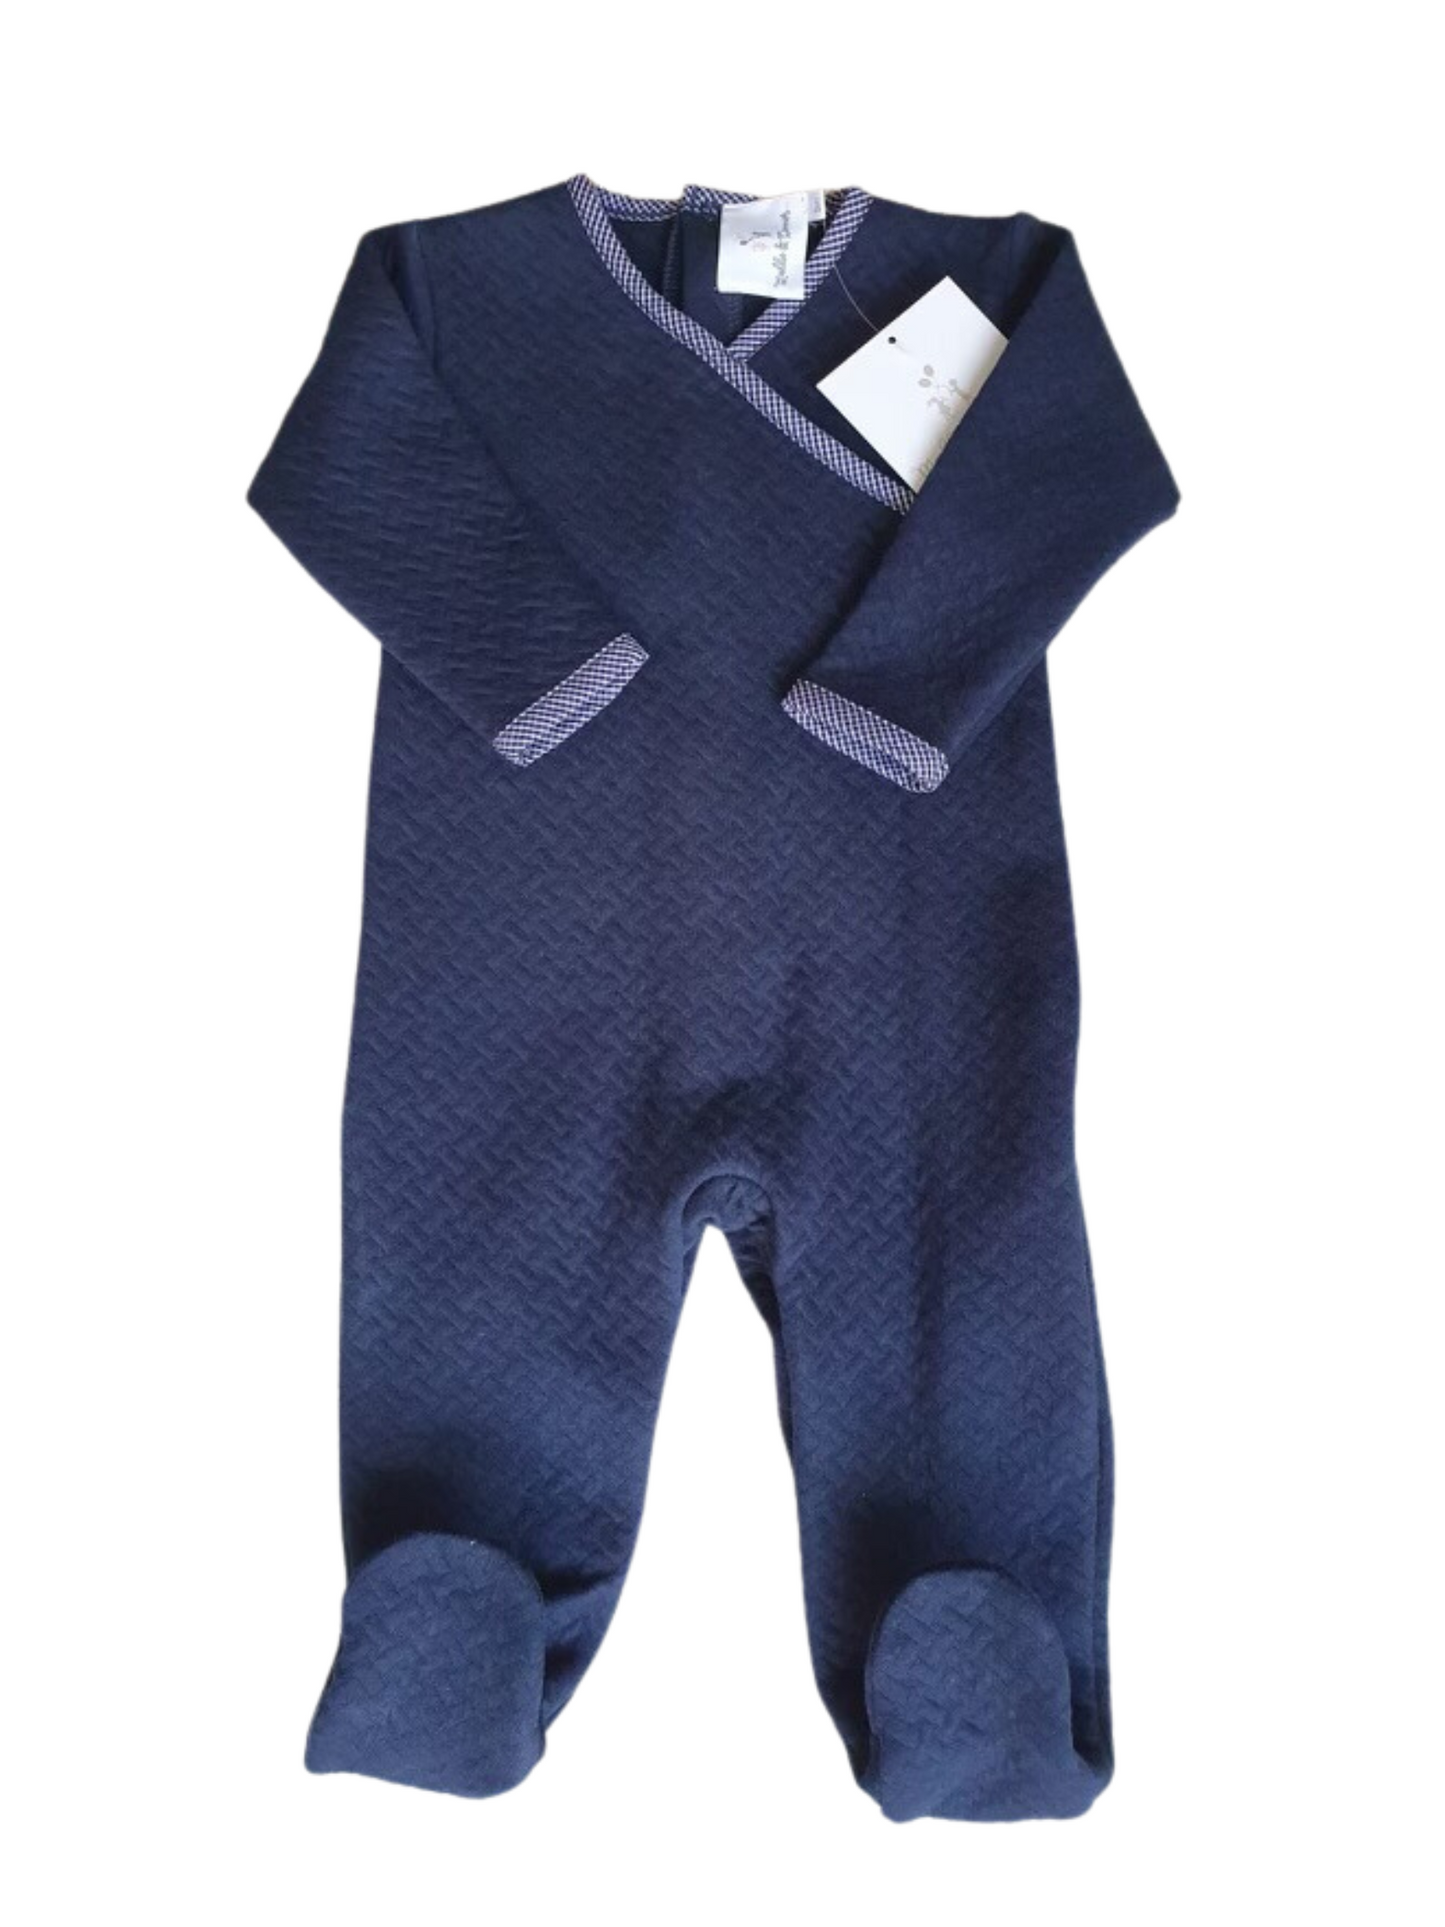 Boys quilted layette